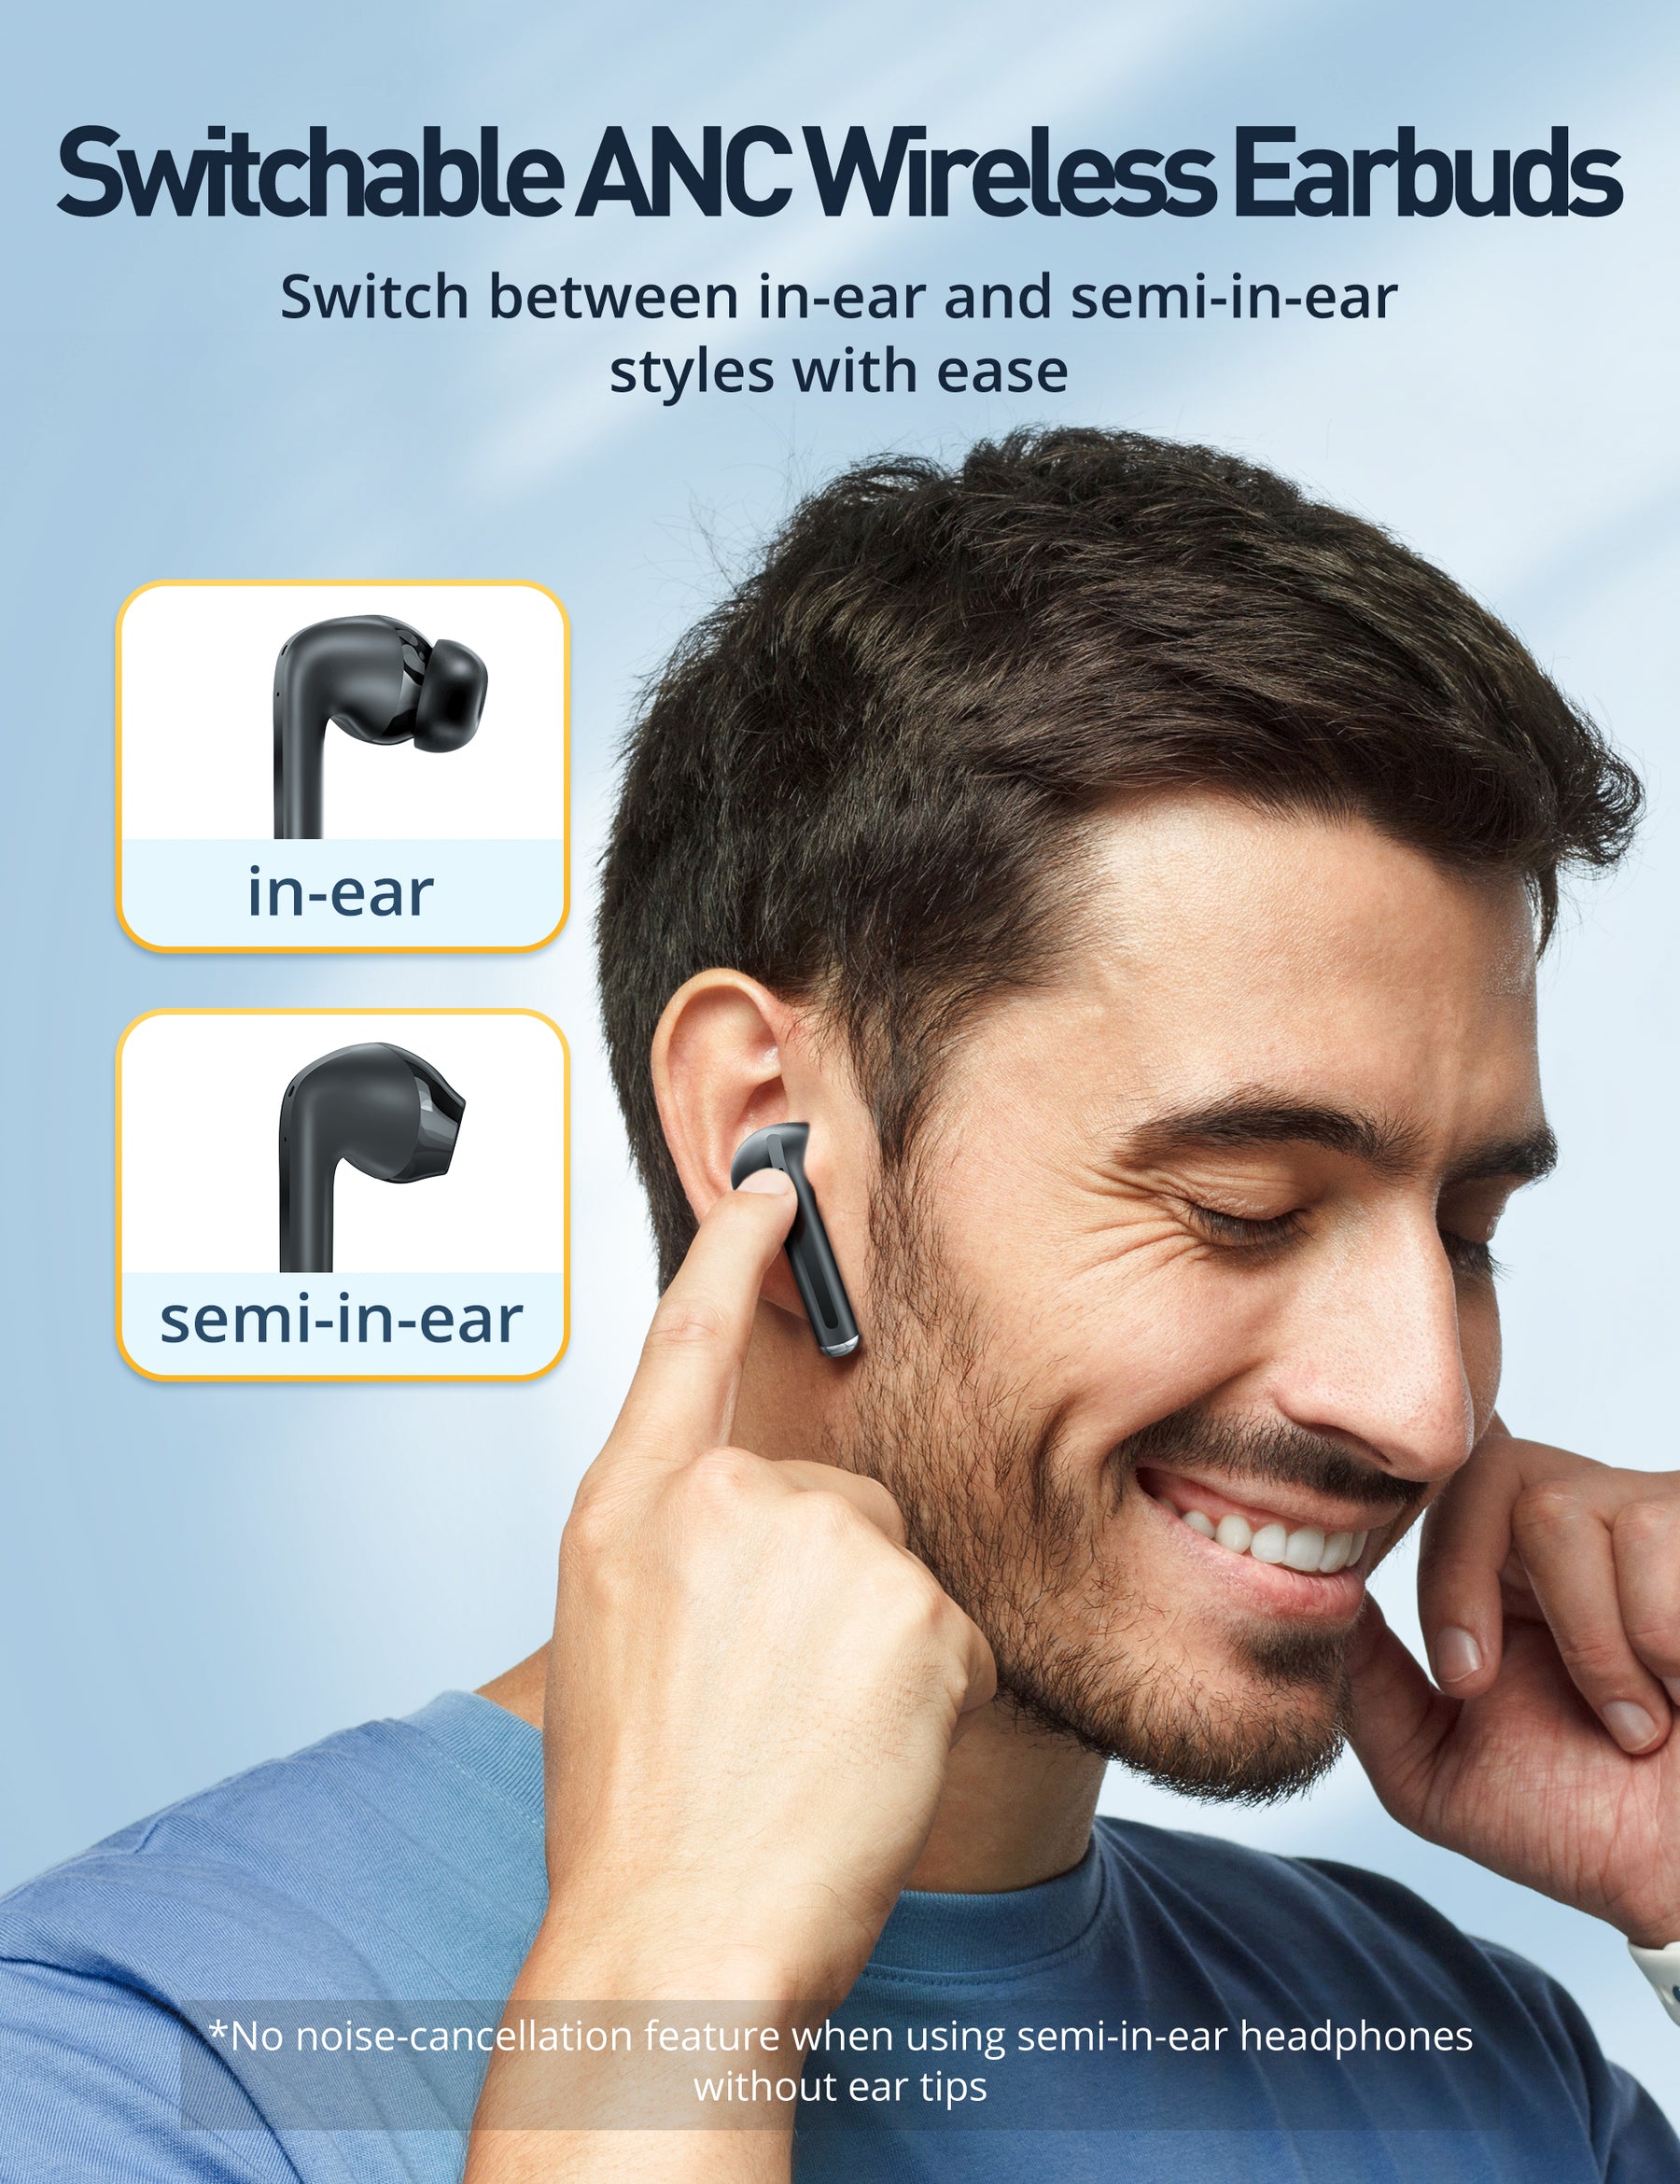 Evatronic Wireless Earbuds BH035, 35dB ANC technology